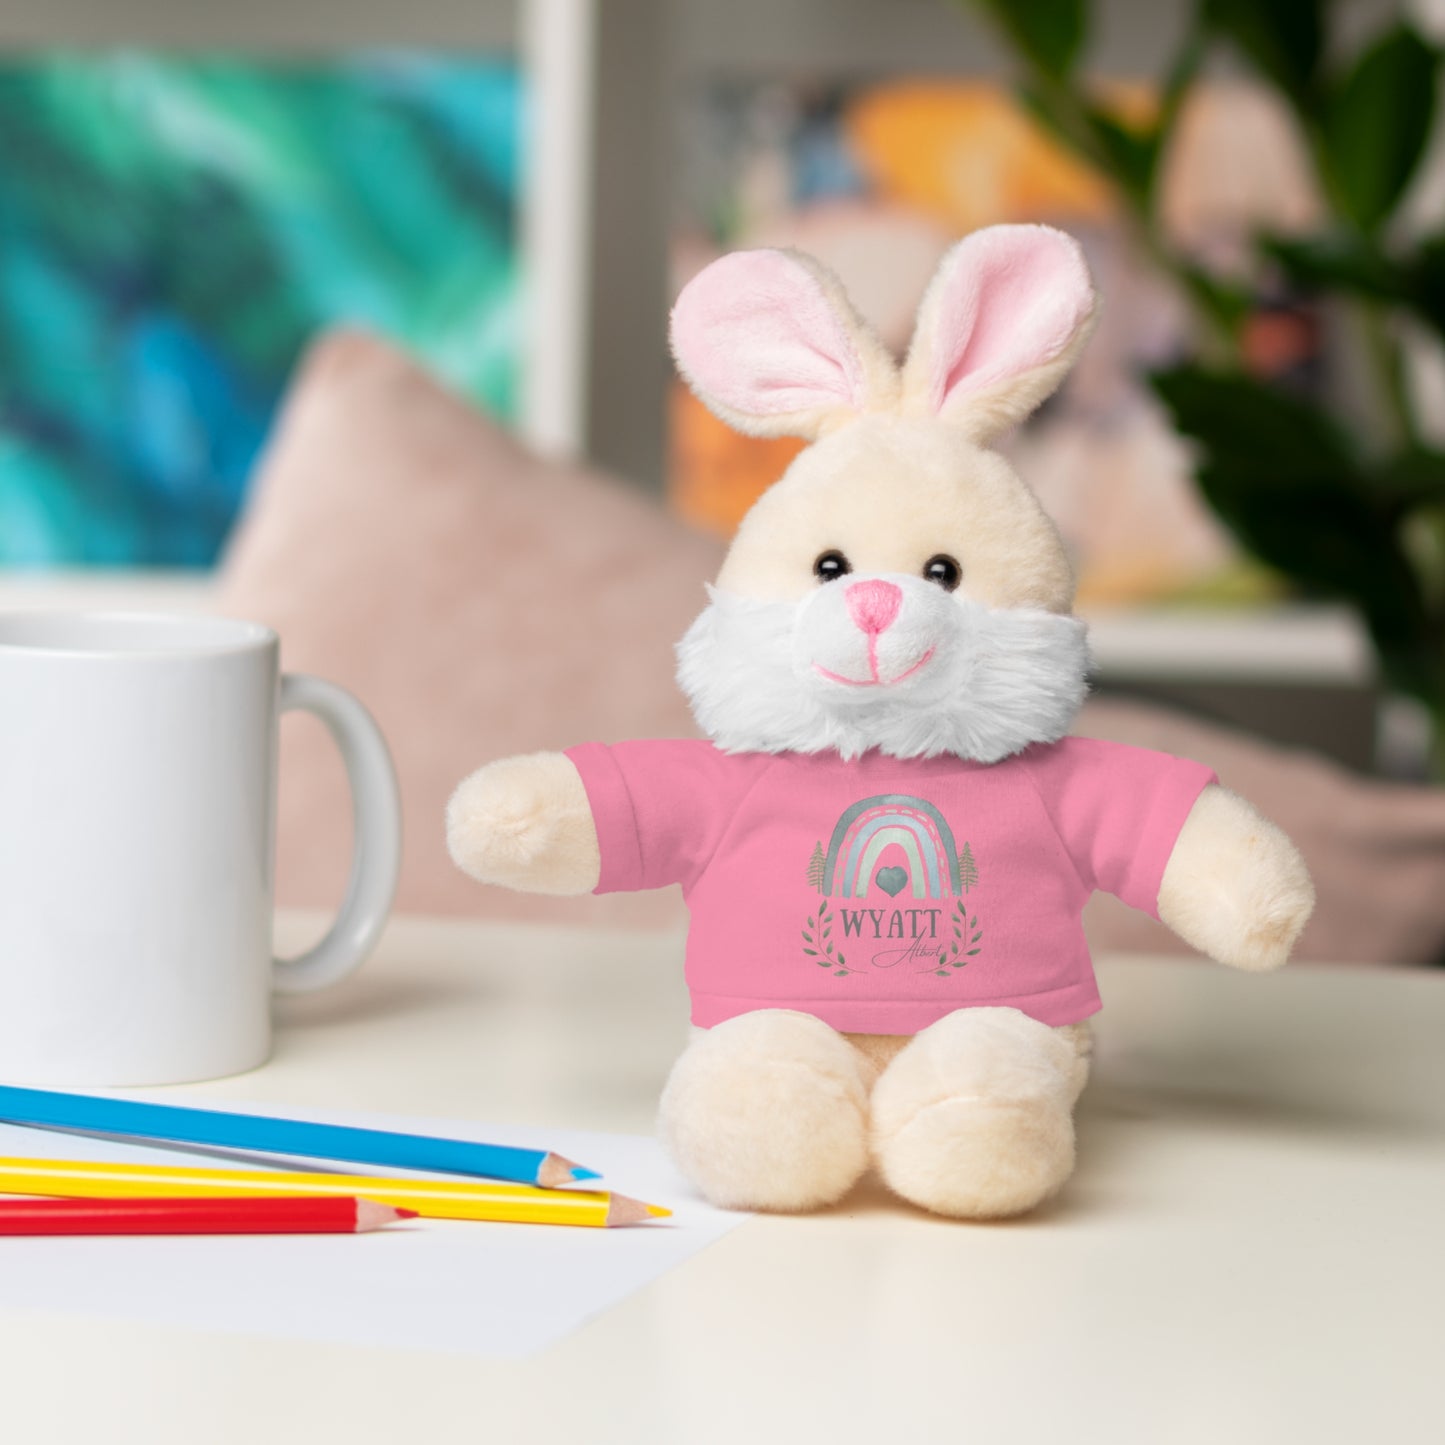 Personalized Name | Stuffed Animals with Customized Tee